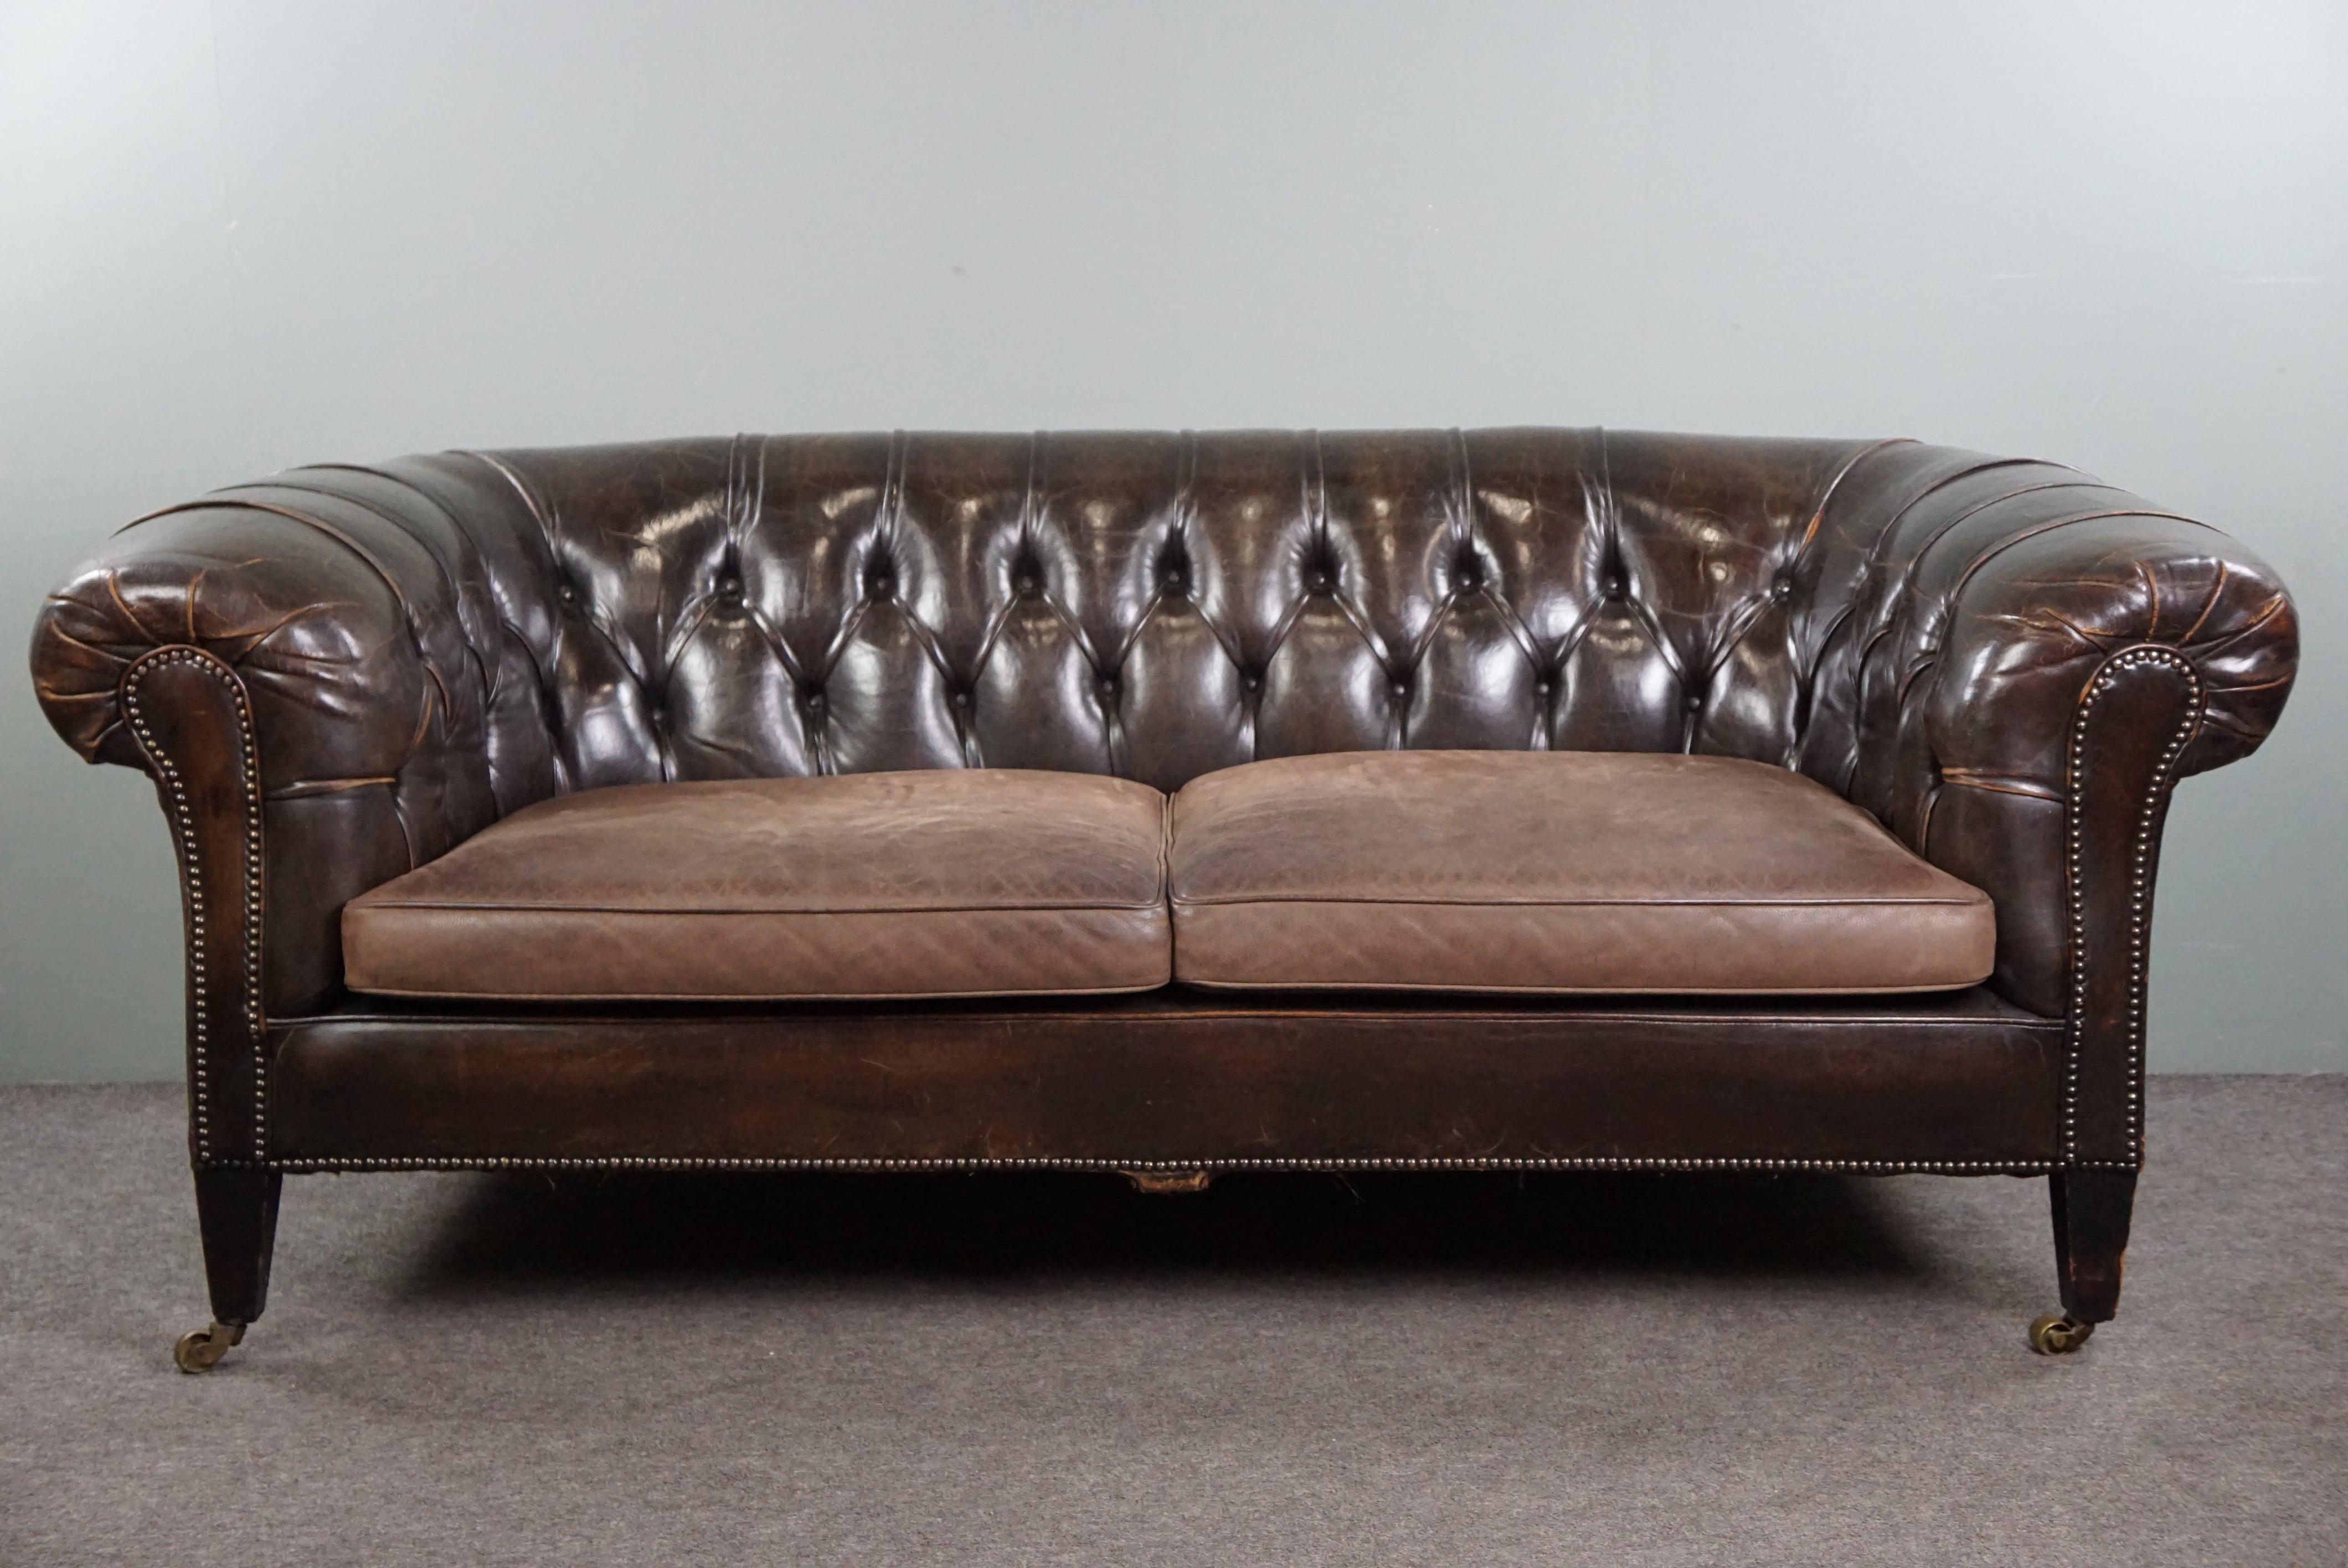 Antique Chesterfield Sofa Full of Allure, 2.5 Seater In Good Condition For Sale In Harderwijk, NL